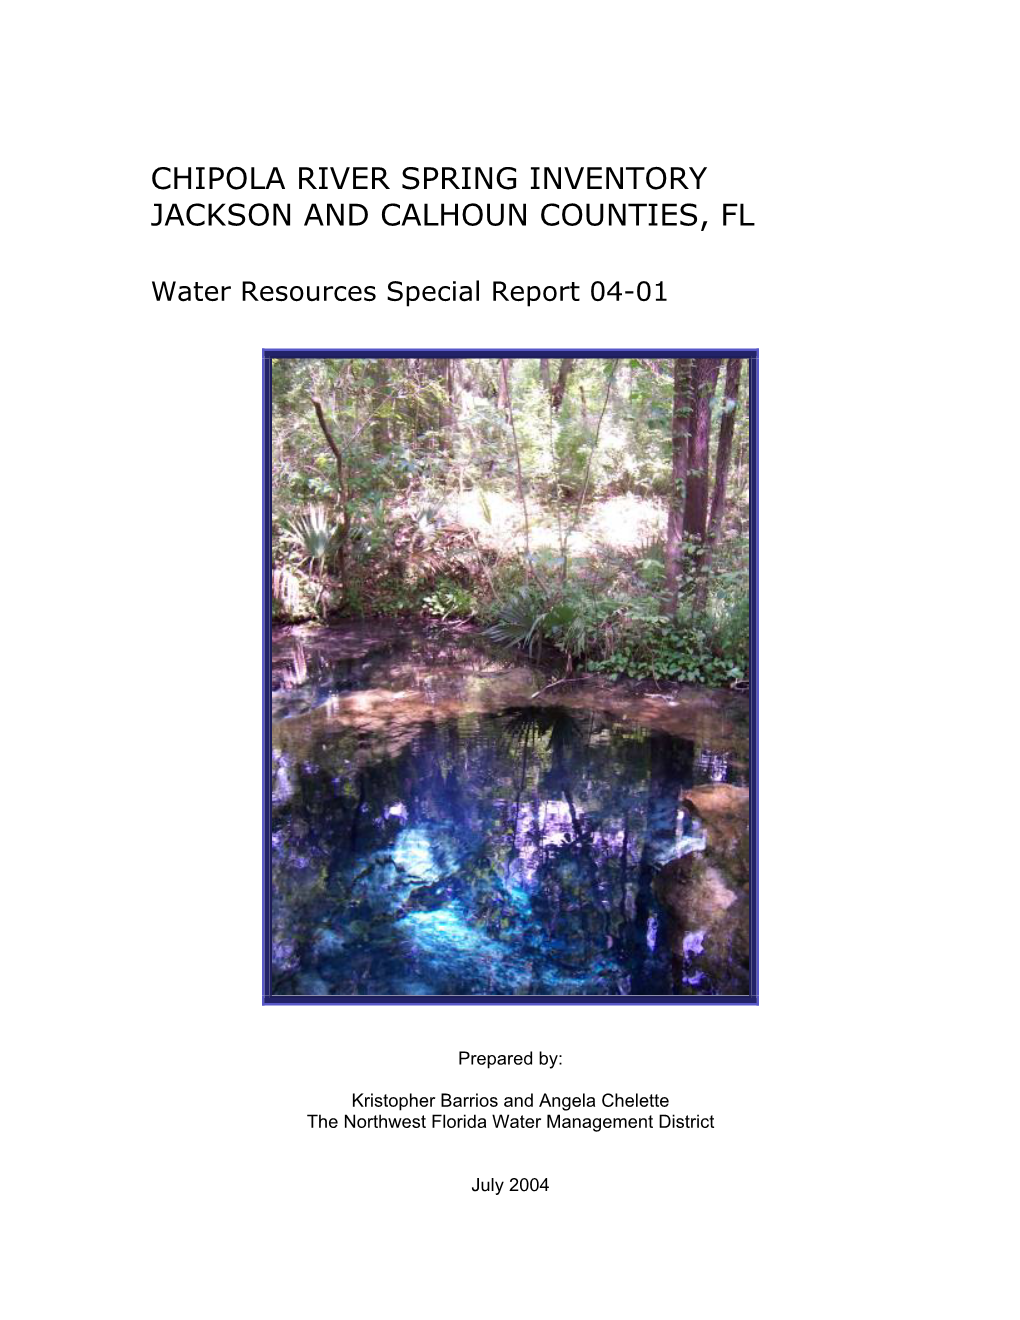 Chipola River Springs Inventory Study Area……………………………………………